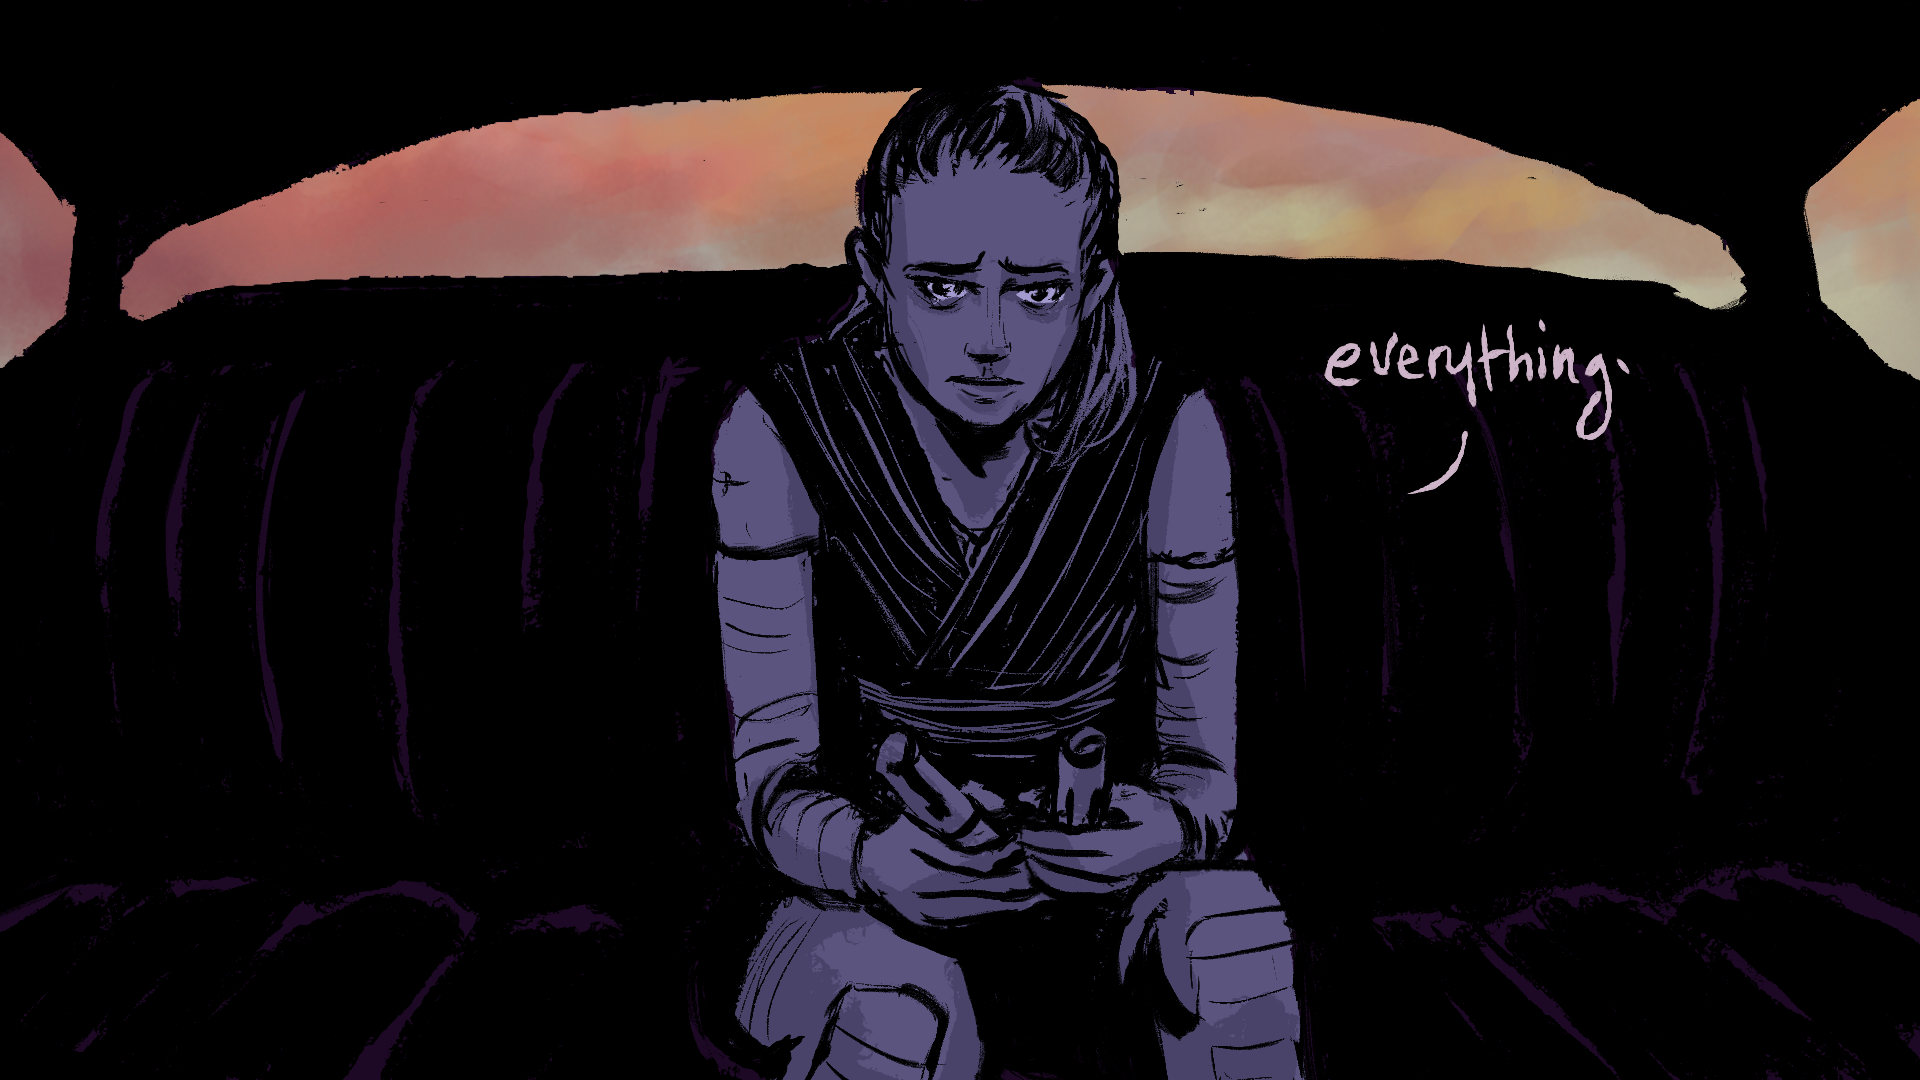 Rey sitting alone in the middle of the backseat. She's hunched over, holding the broken halves of a lightsaber. Her eyes are haunted. The sky in the rear window is a wash of pastel. "Everything," she says